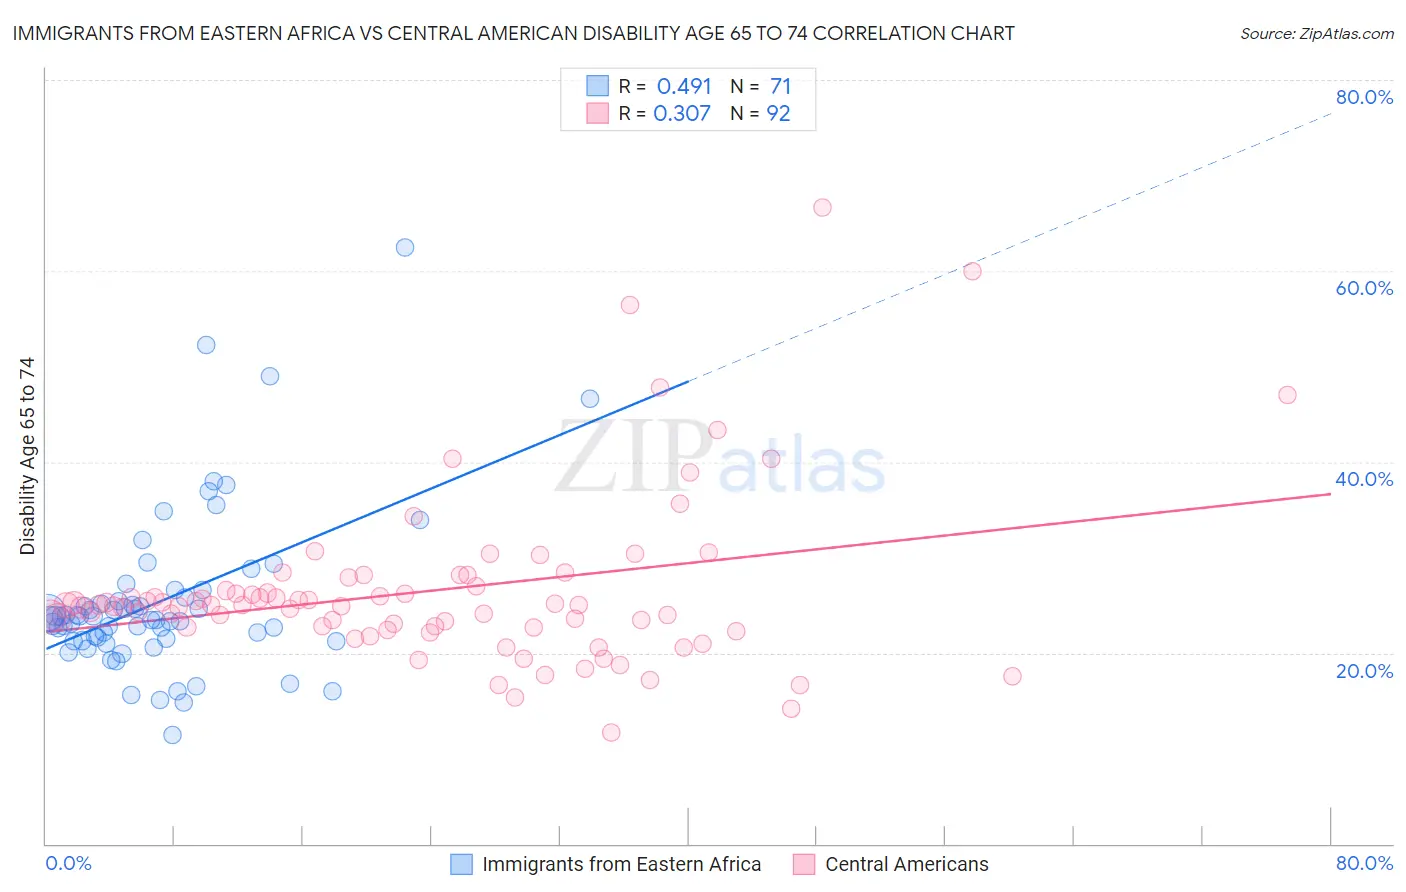 Immigrants from Eastern Africa vs Central American Disability Age 65 to 74